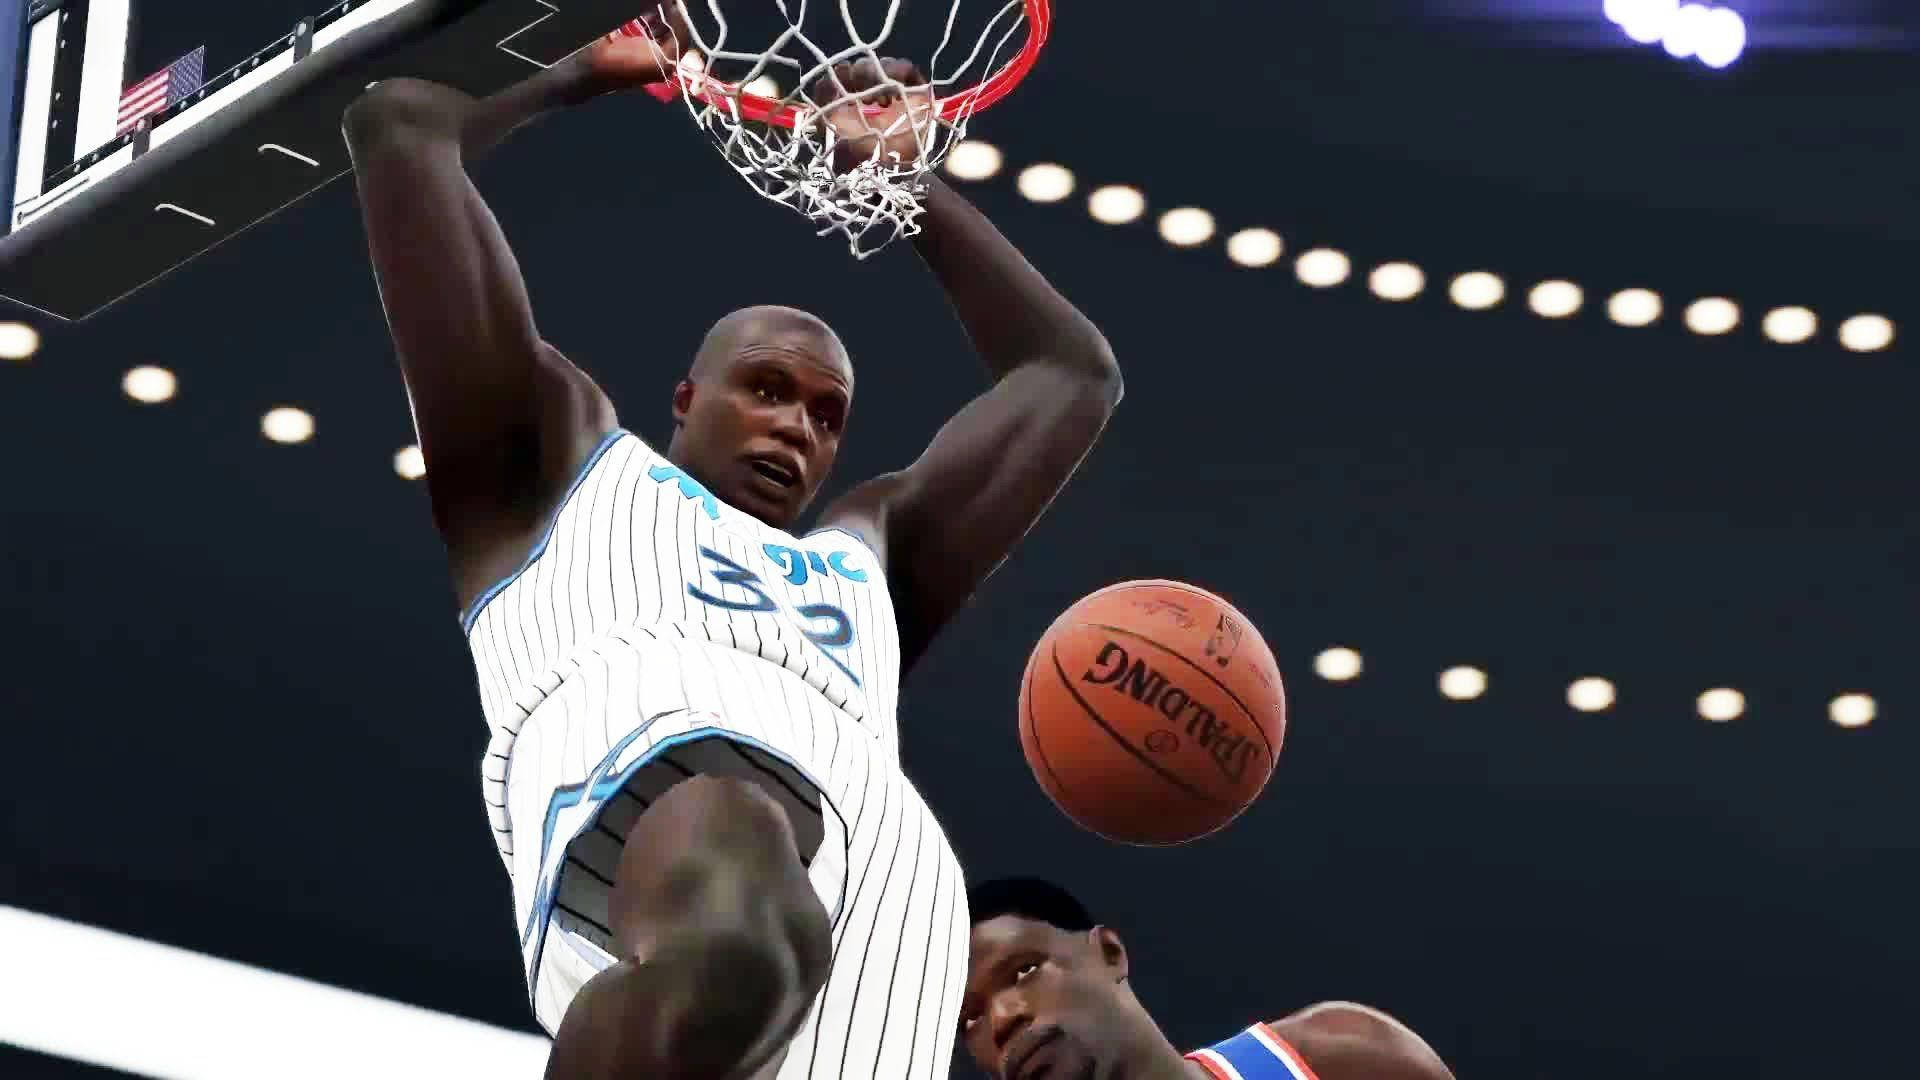 shaquille o neal dunking